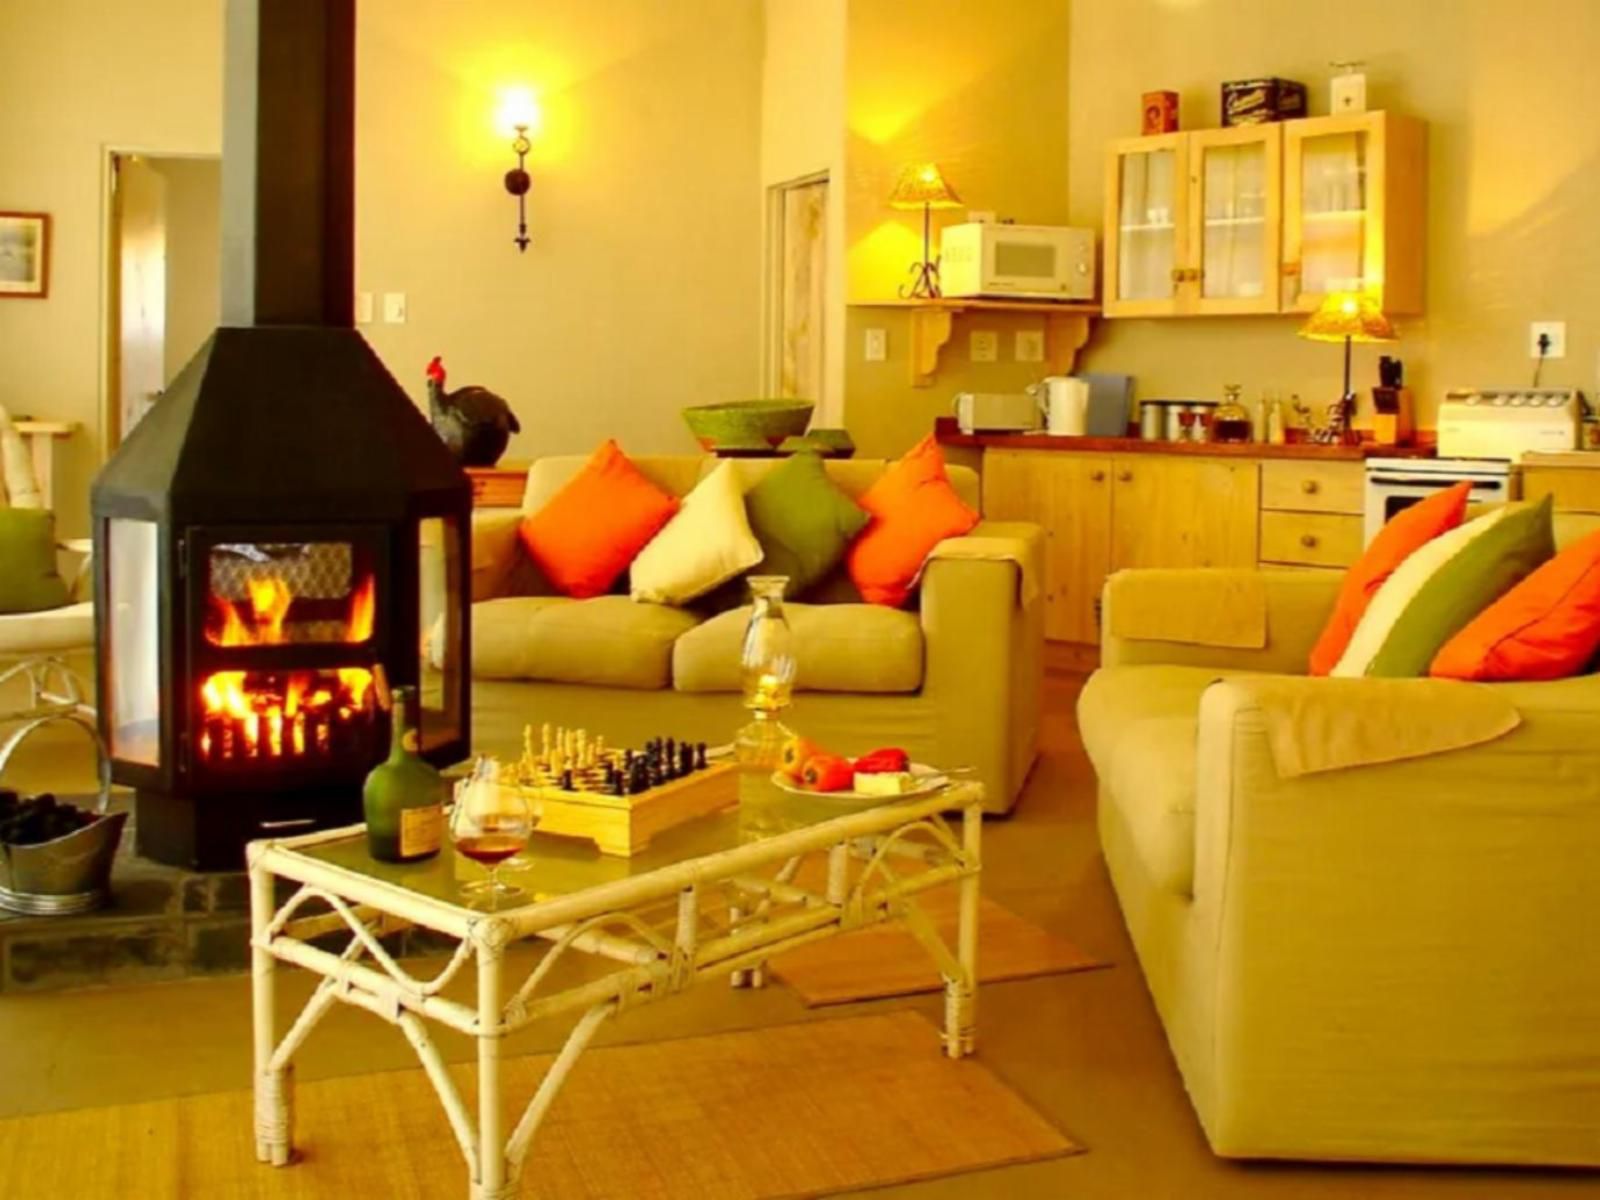 Amohela Ho Spitskop Country Retreat And Conservancy Ficksburg Free State South Africa Colorful, Fire, Nature, Fireplace, Living Room